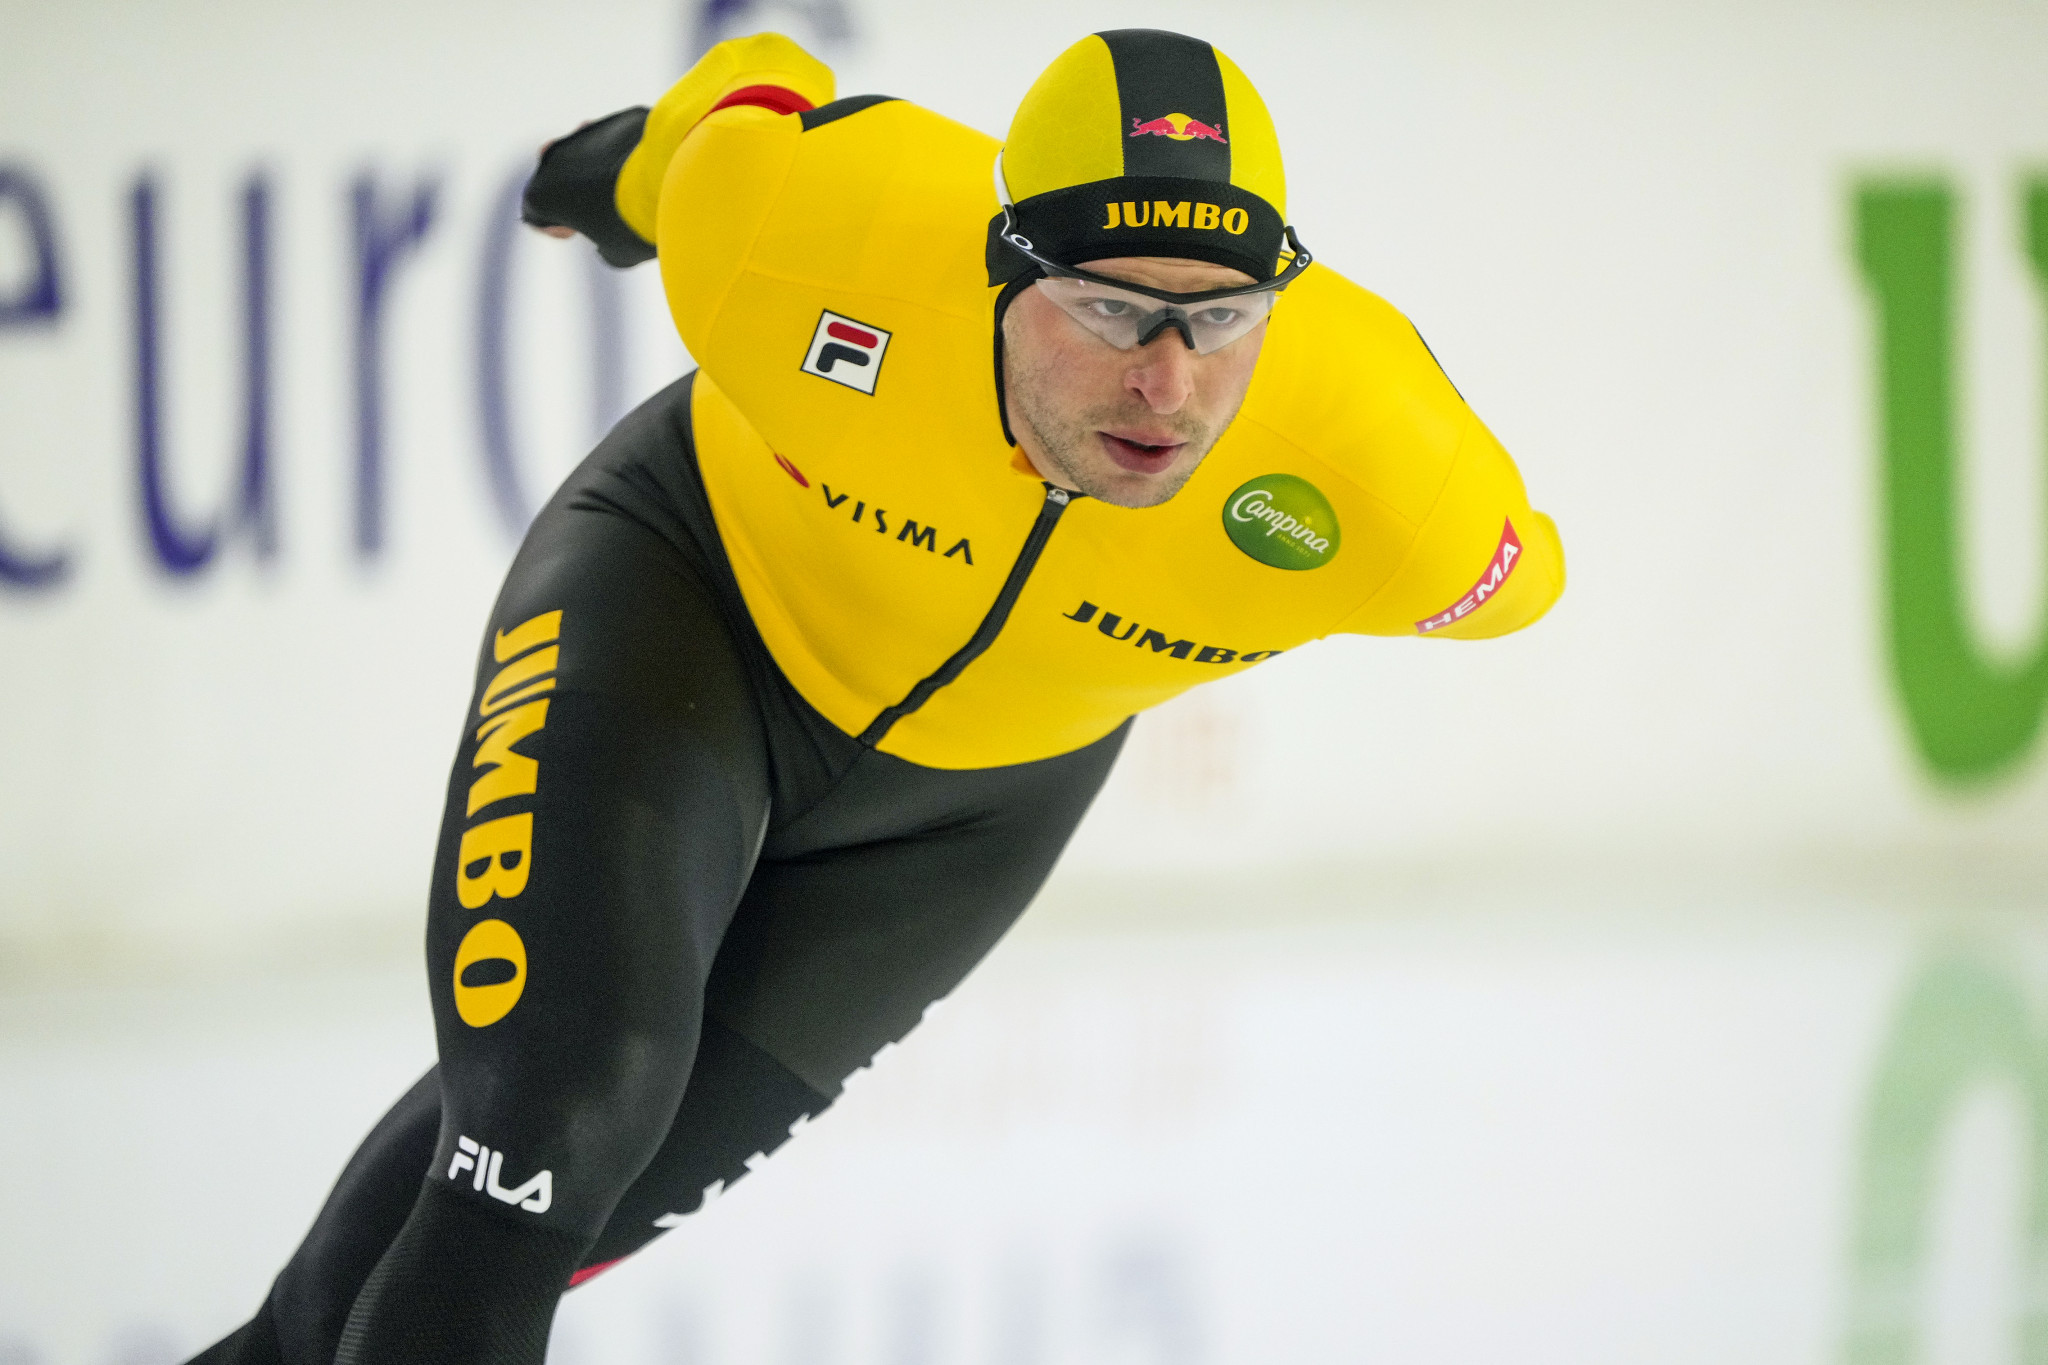 Dutch speed skater Sven Kramer, the Olympic champion in the men's 5000m at Pyeongchang 2018, is among those to have called for Government support for the Thialf ice arena ©Getty Images